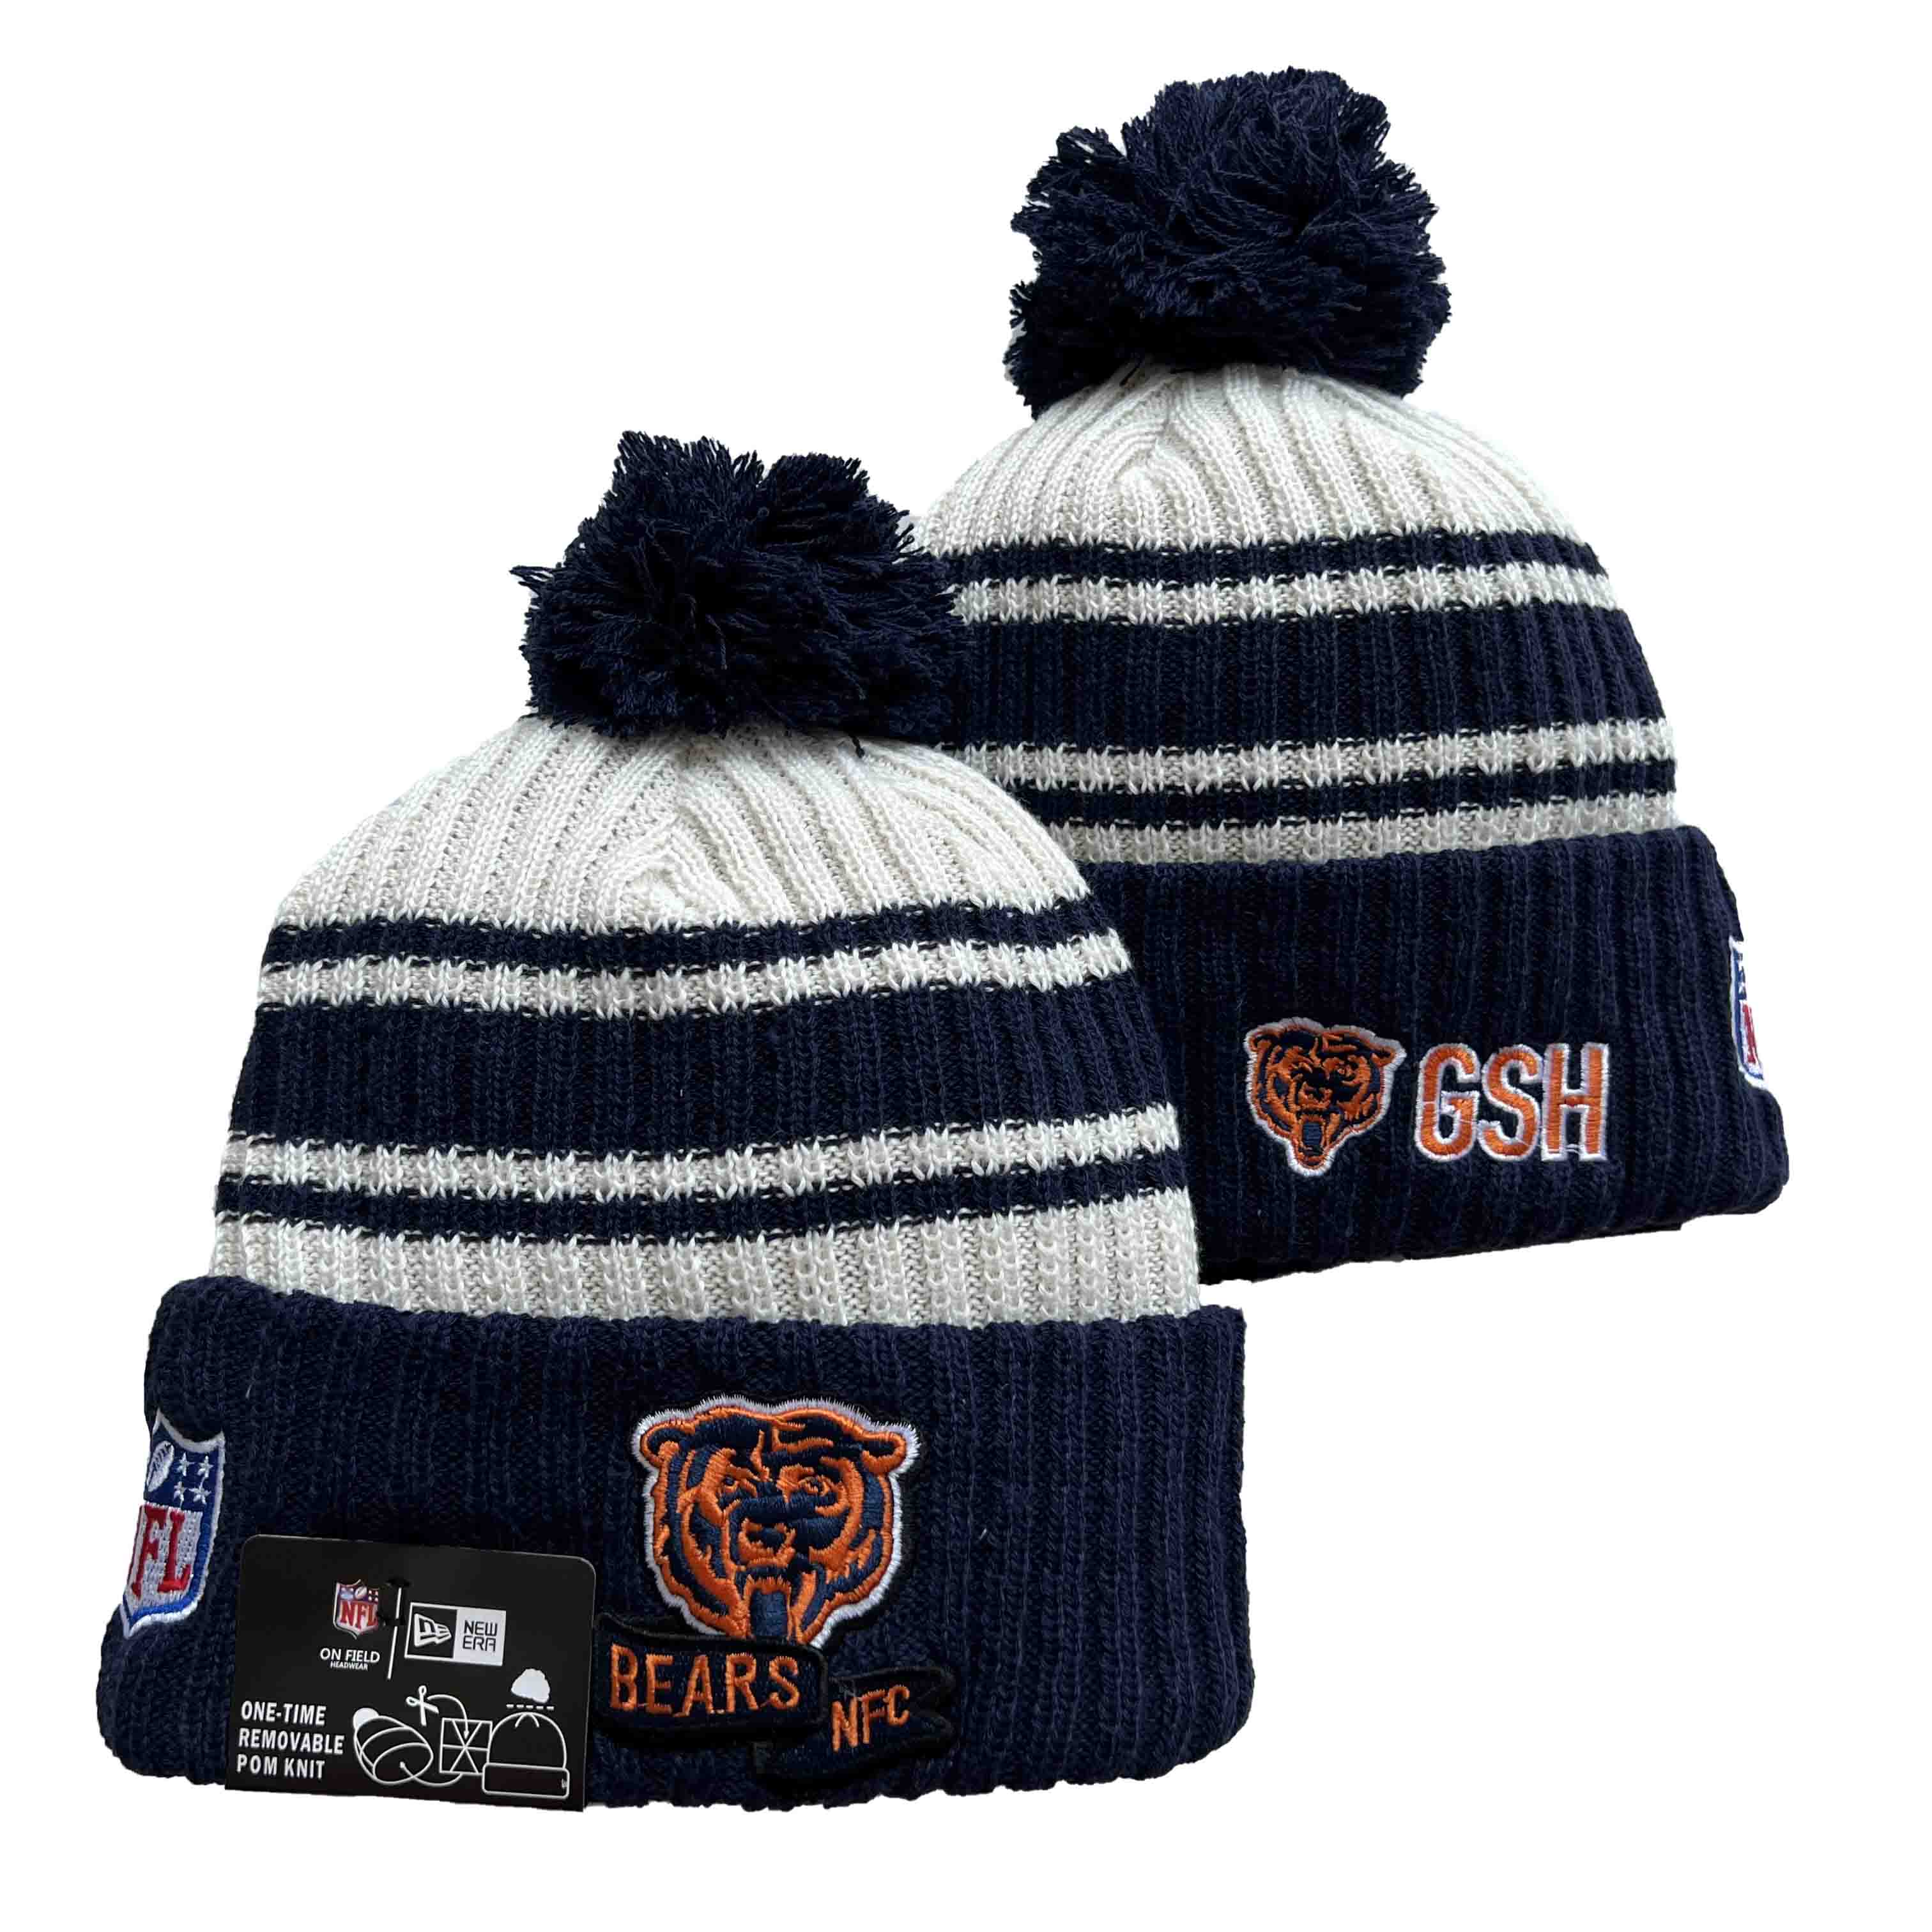 NFL Chicago Bears Beanies Knit Hats-YD893